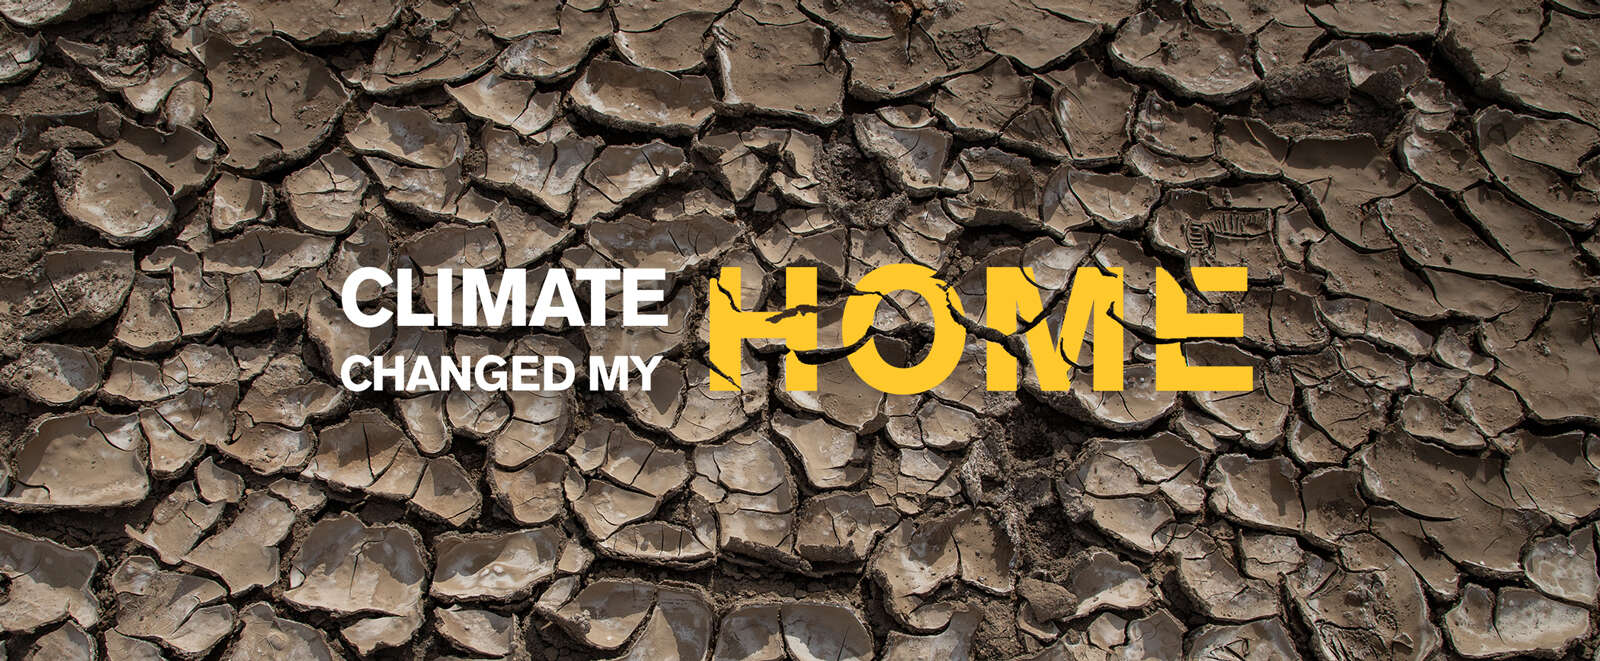 Climate changed my home